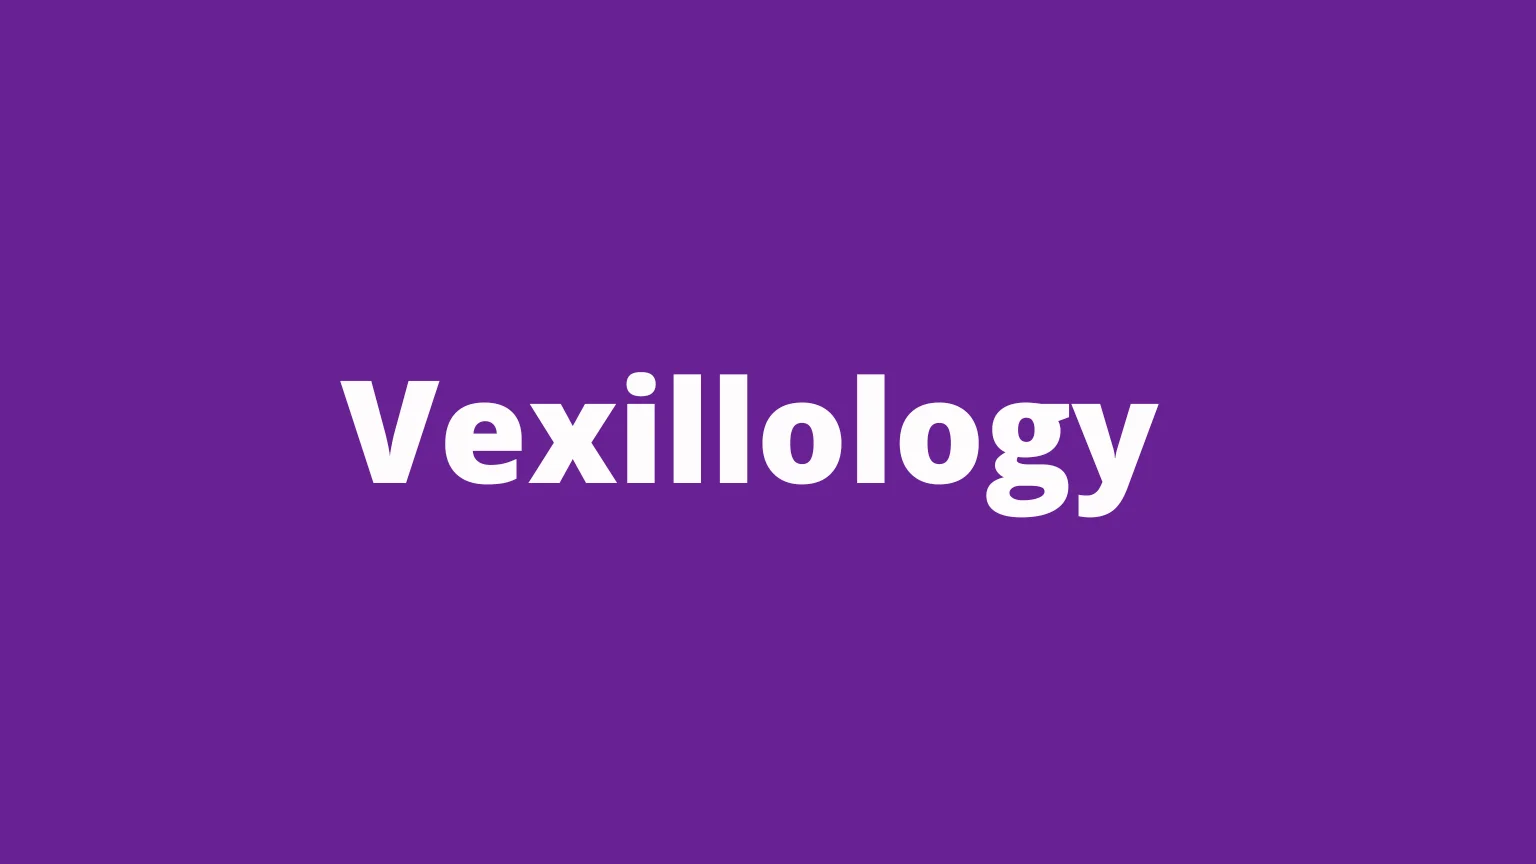 The word vexillology and its meaning